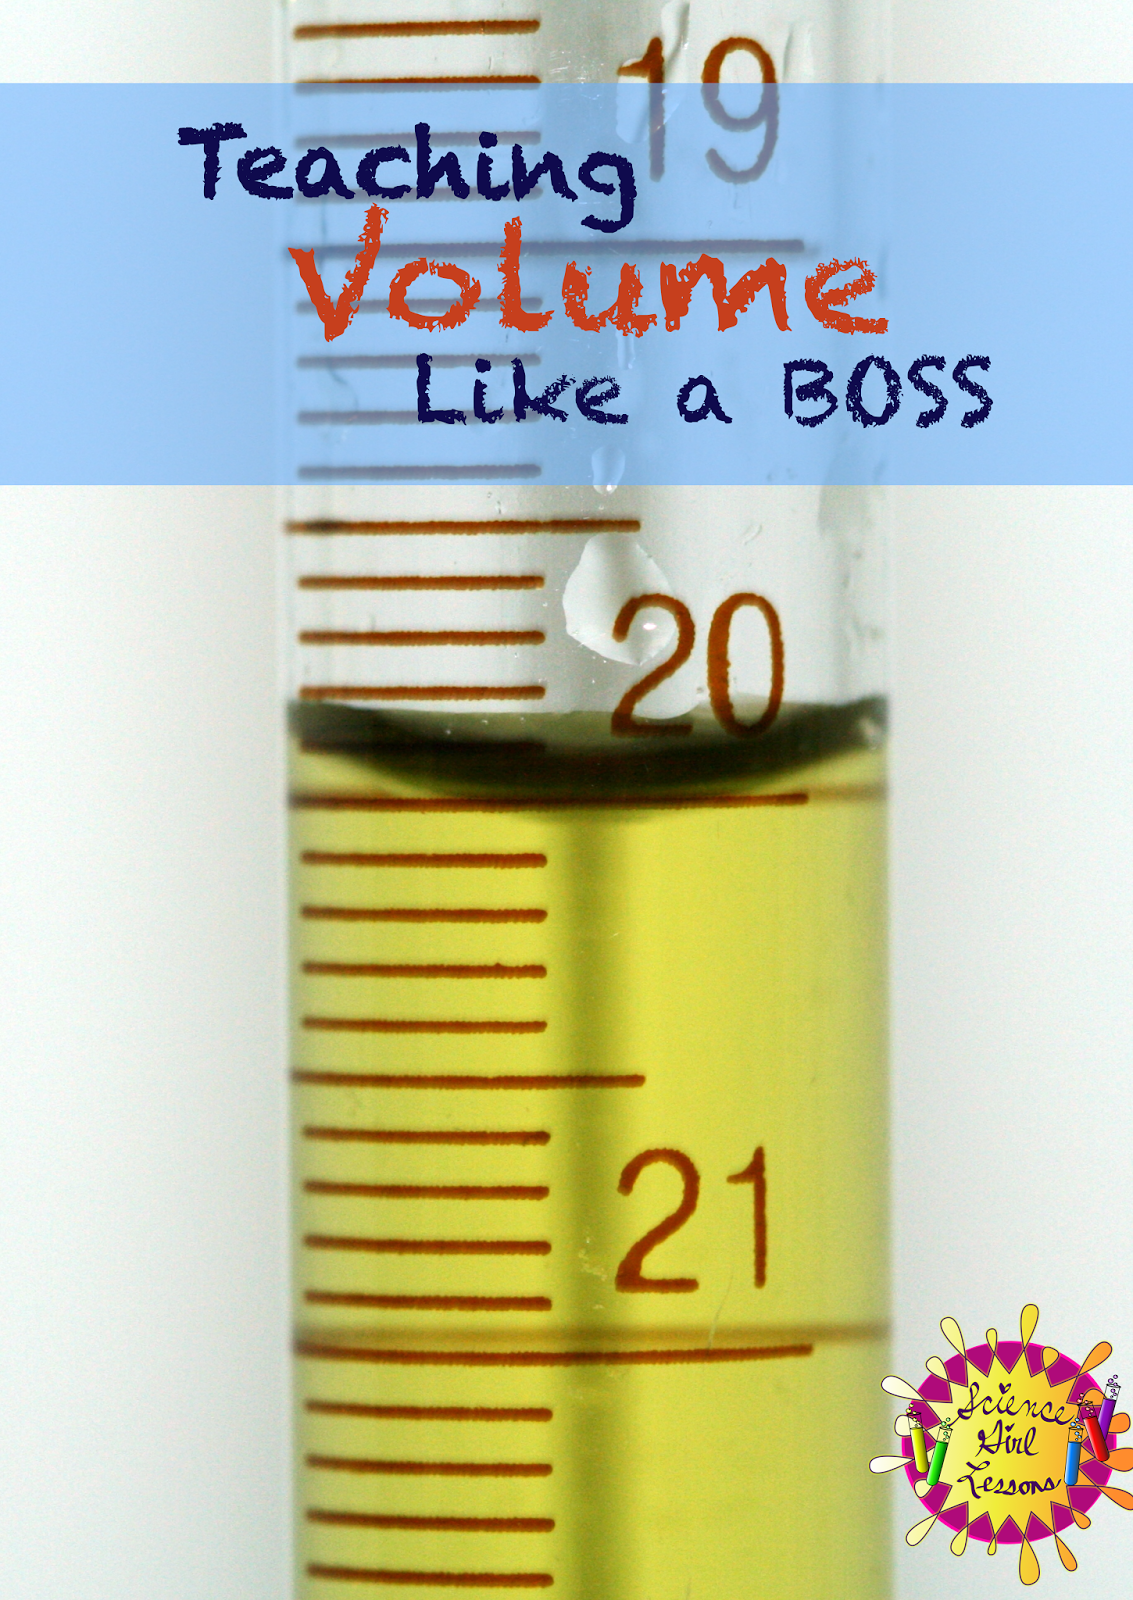 Becca The Science Girl & Other Amazing Educational Things Intended For Measuring Liquid Volume Worksheet